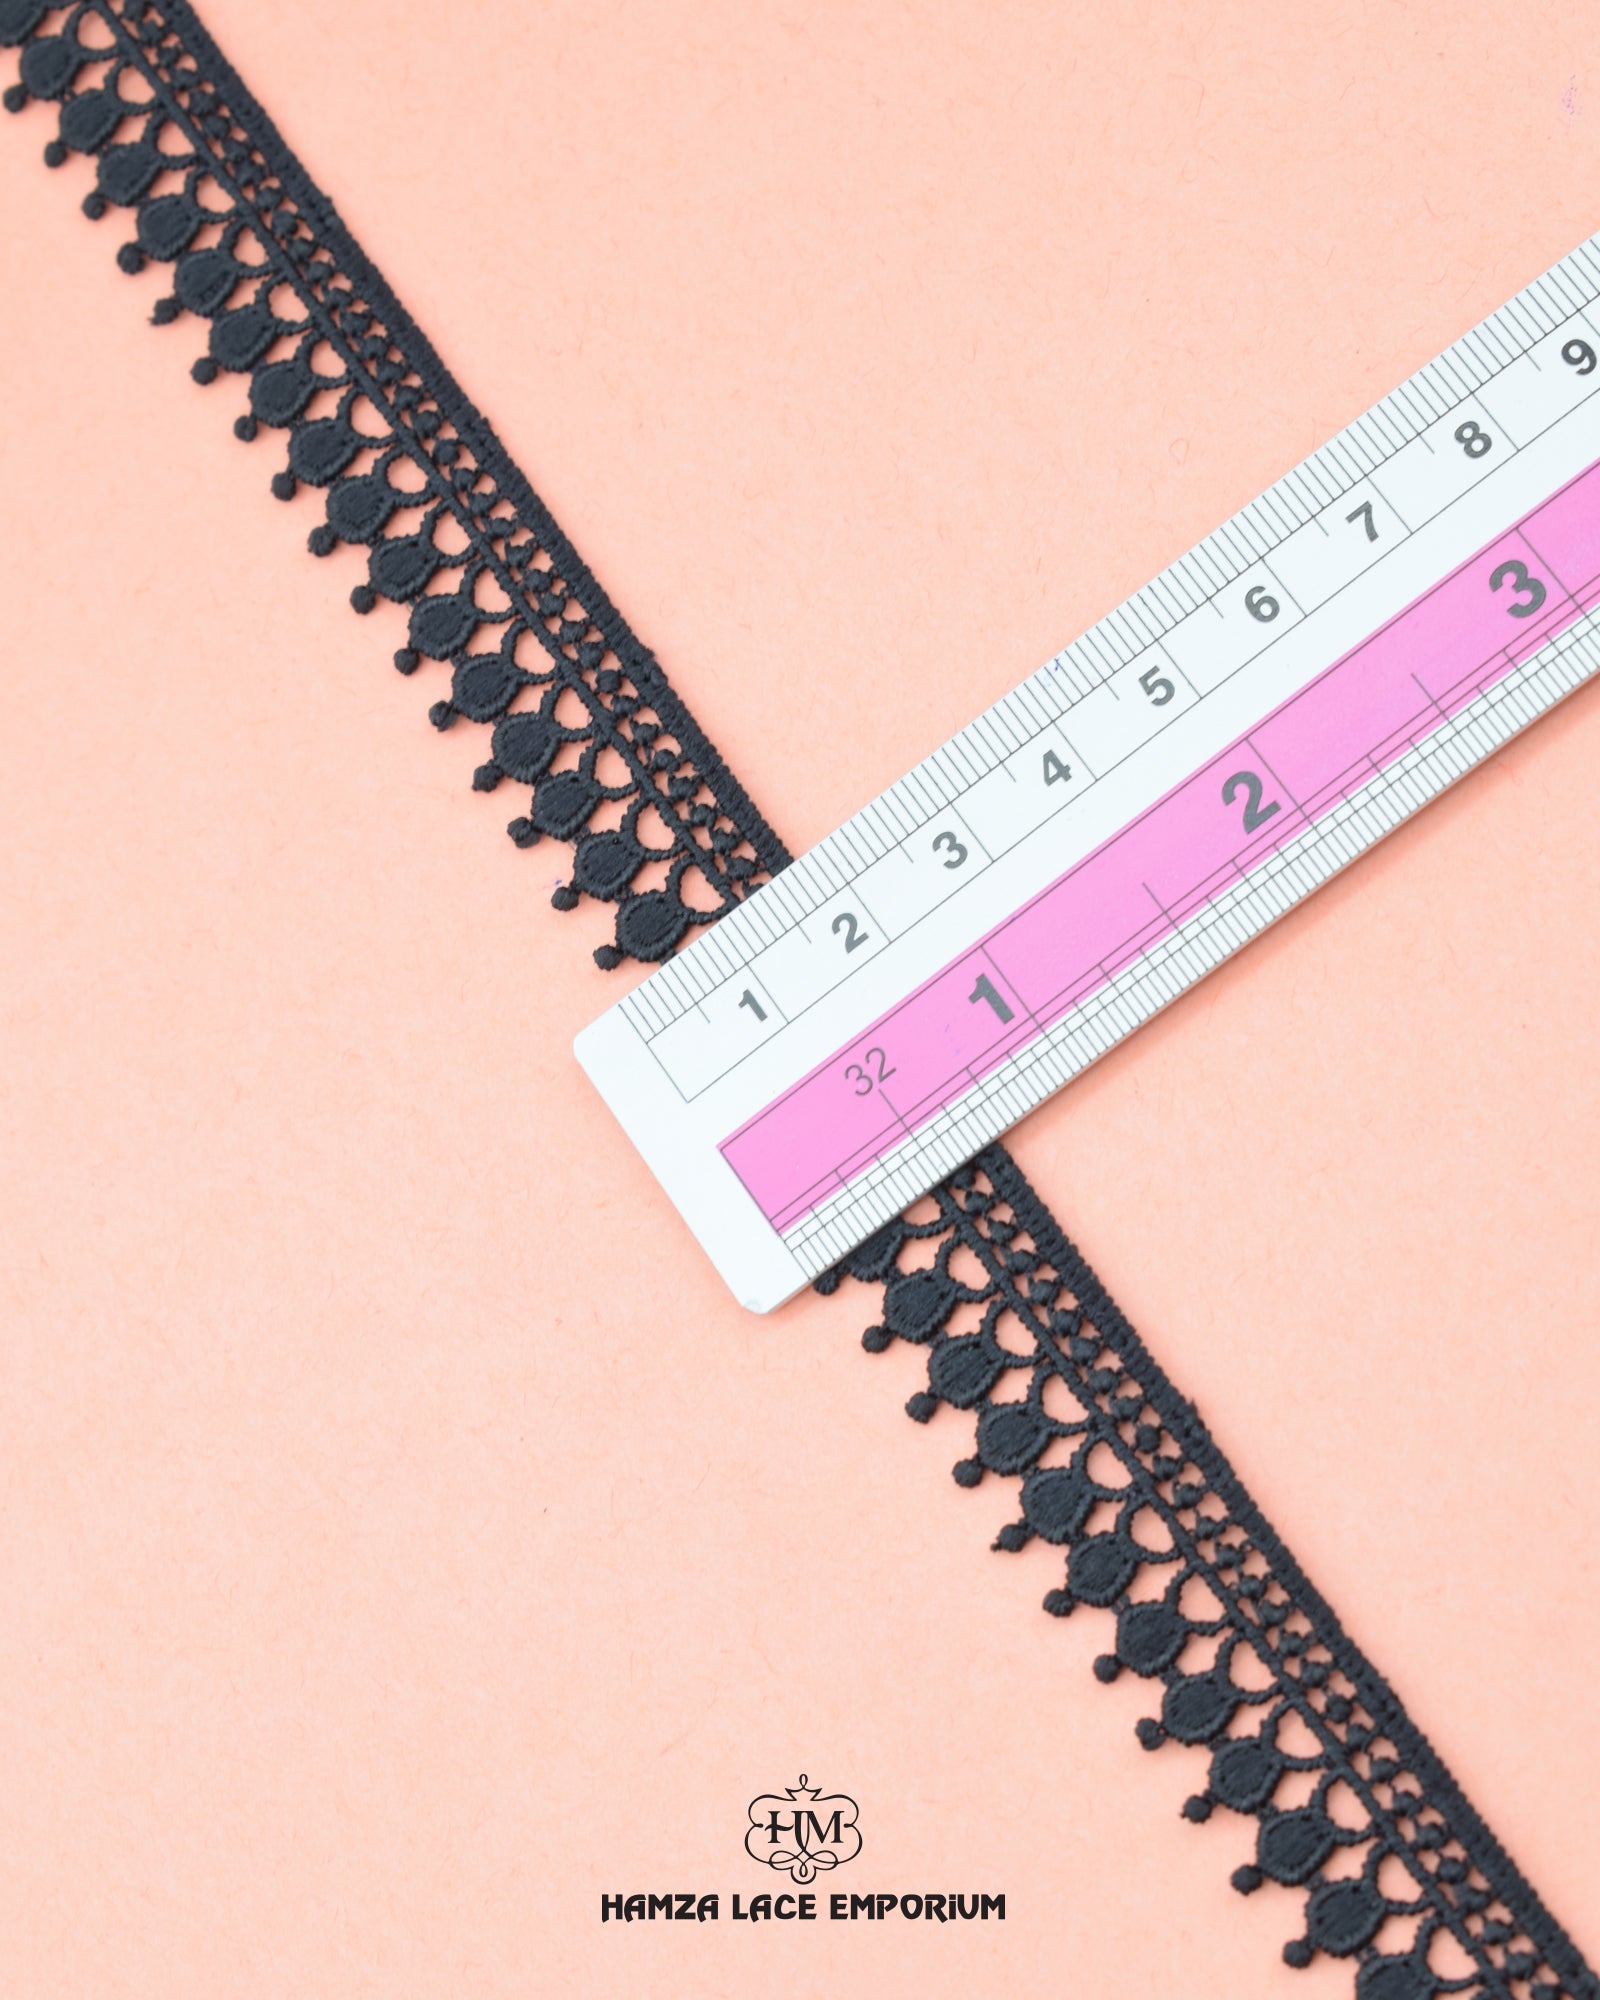 0.75 inches size of the 'Edging Loop Lace 21962' is given with the help of a scale